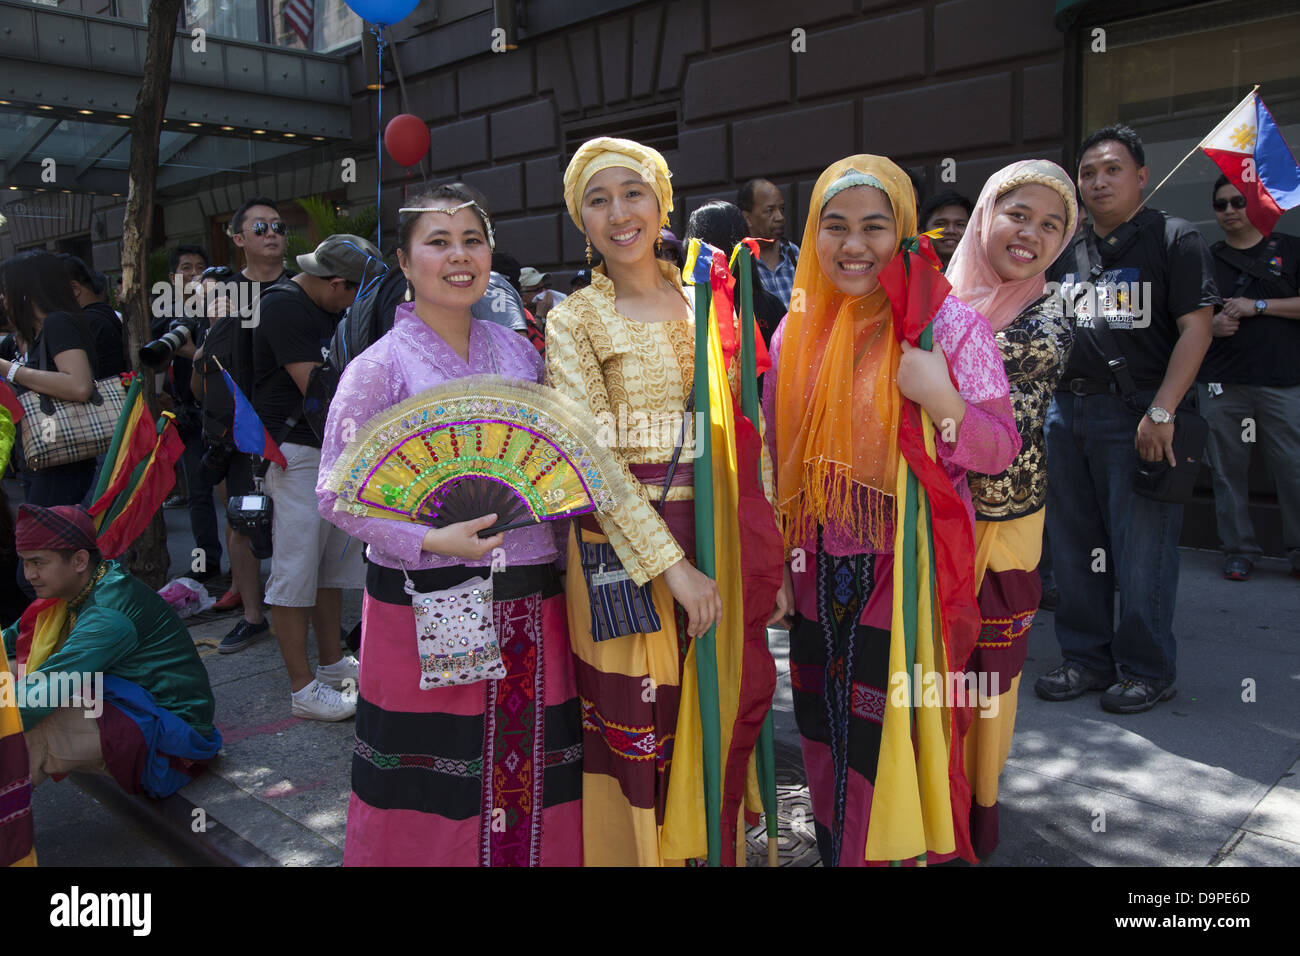 Women in colorful costumes ready to perform in the Filipino Parade on Madison Ave. in NYC Stock Photo